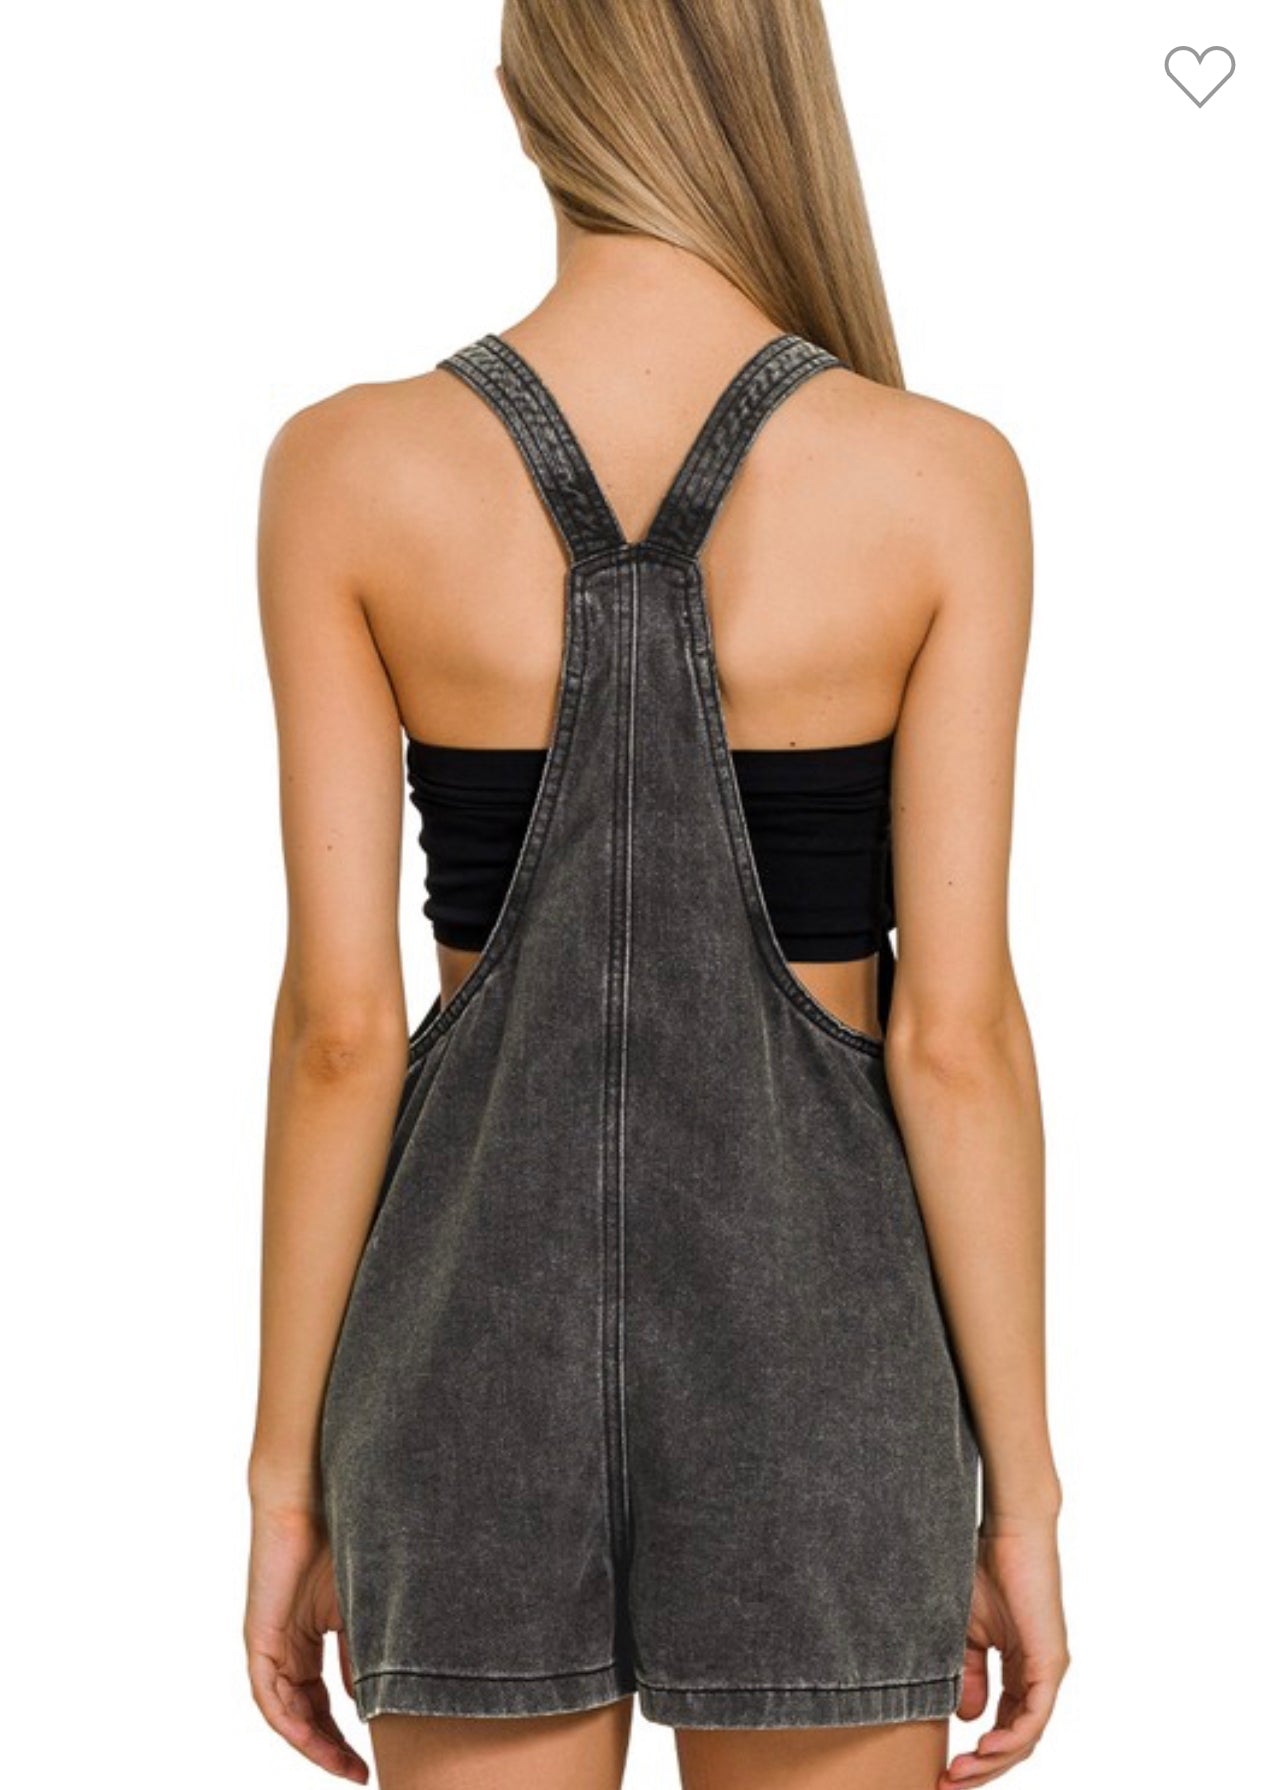 Knot Strap Overalls